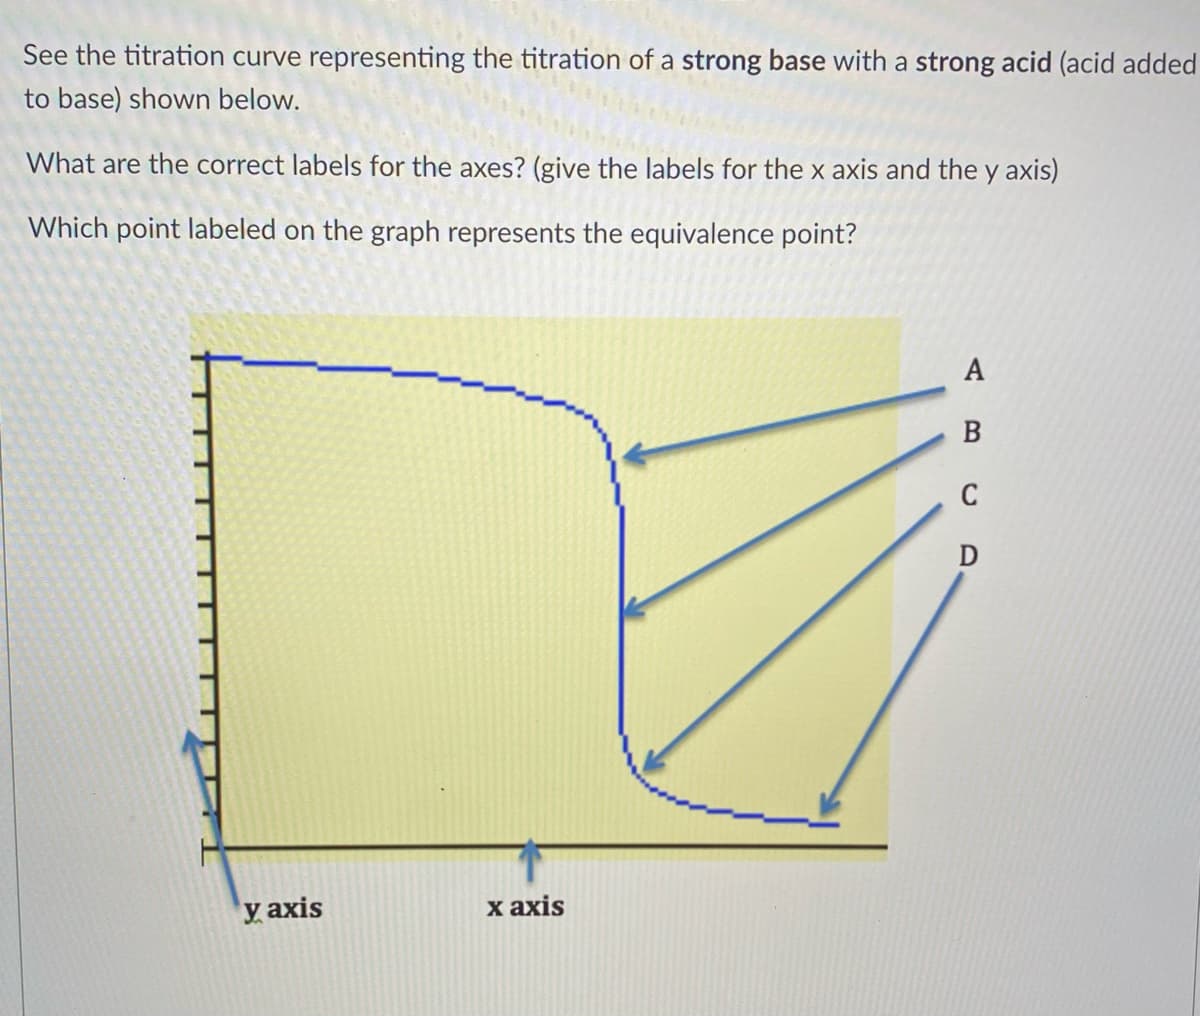 See the titration curve representing the titration of a strong base with a strong acid (acid added
to base) shown below.
What are the correct labels for the axes? (give the labels for the x axis and the y axis)
Which point labeled on the graph represents the equivalence point?
A
B
C
y axis
х ахis
